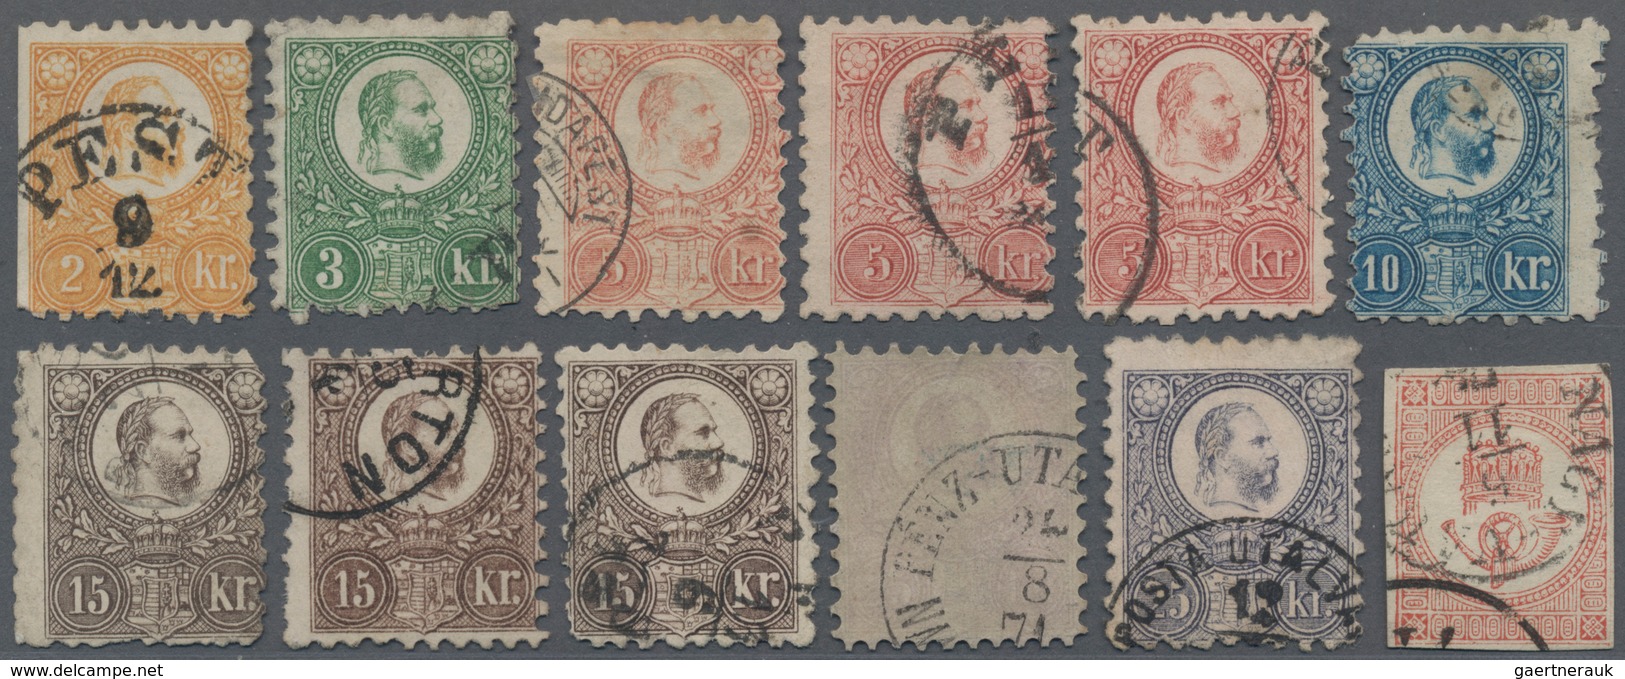 Ungarn: 1871-99 Ca.: Group Of 30 Used Stamps, With 12 Singles Of 1871 Franz Joseph Issues, One 1871 - Brieven En Documenten